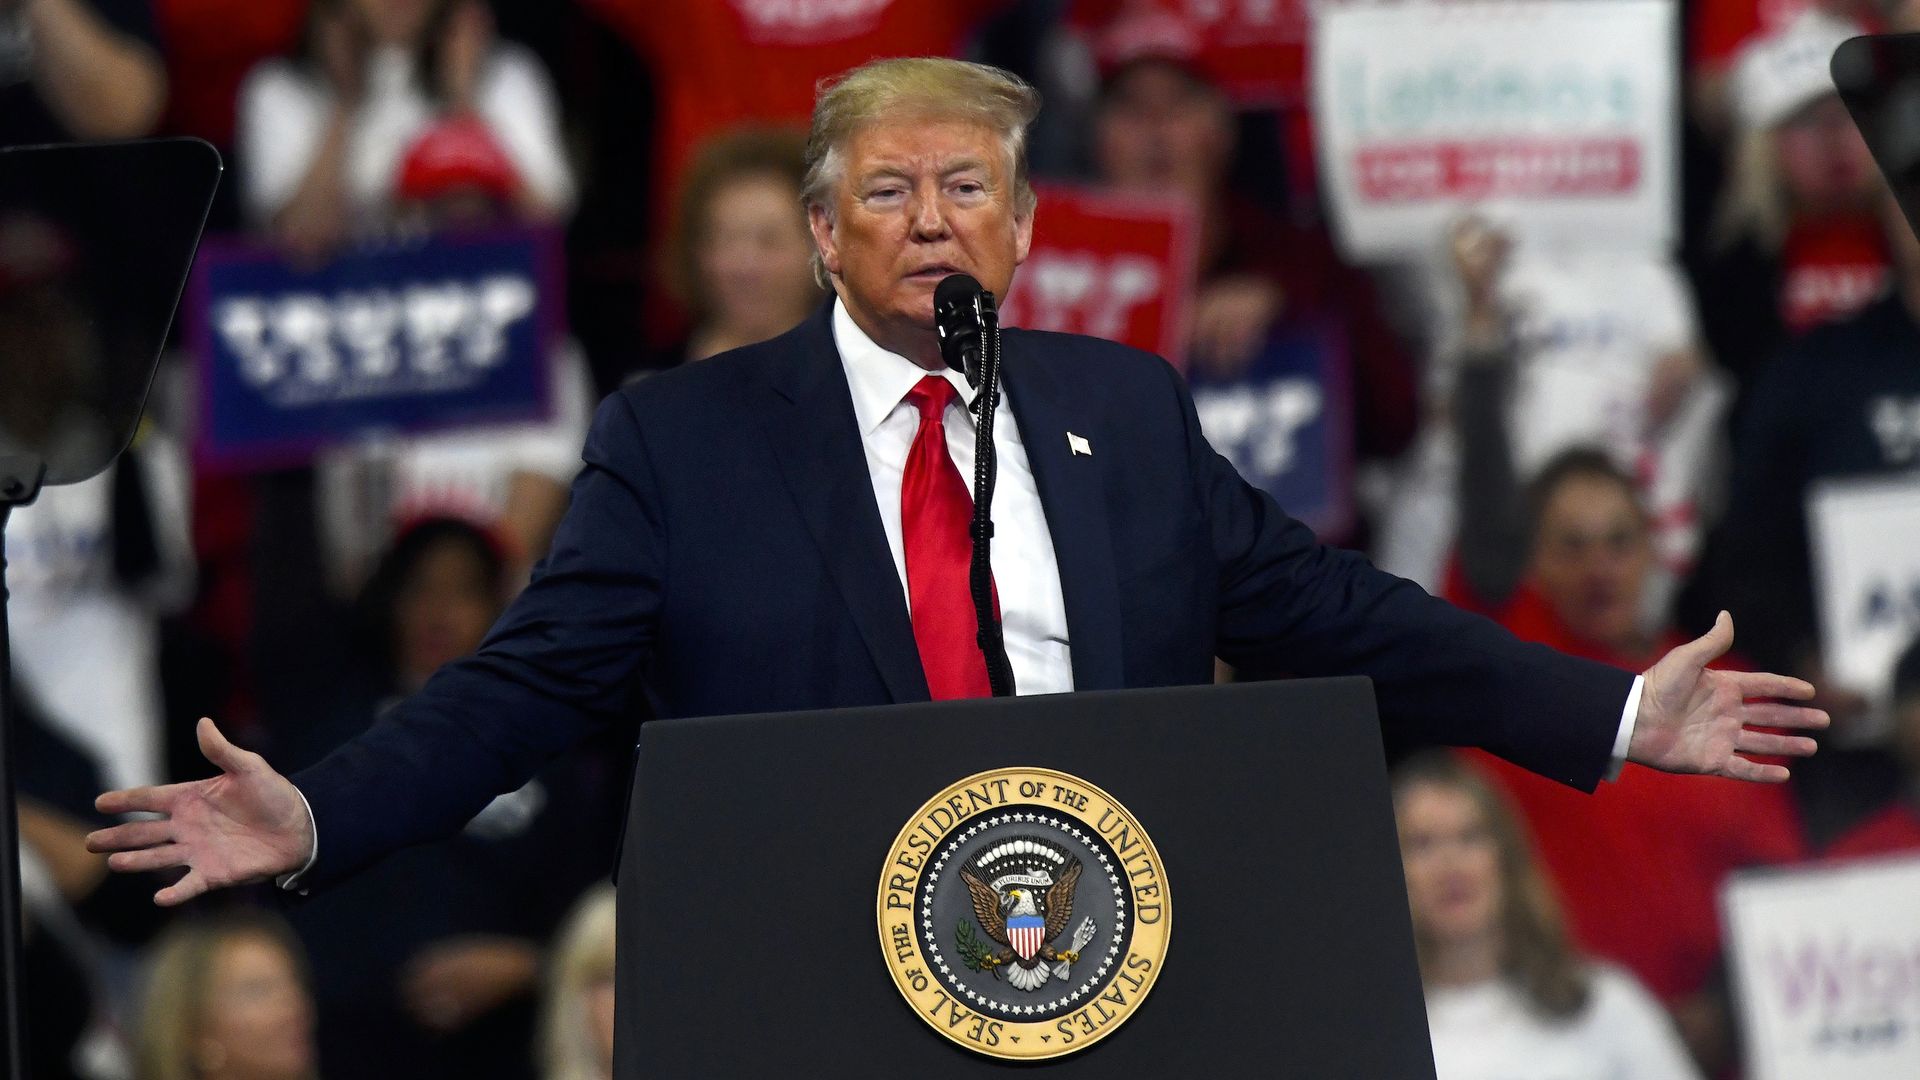 President Donald Trump speaks during a campaign rally on December 10, 2019 in Hershey, Pennsylvania. 